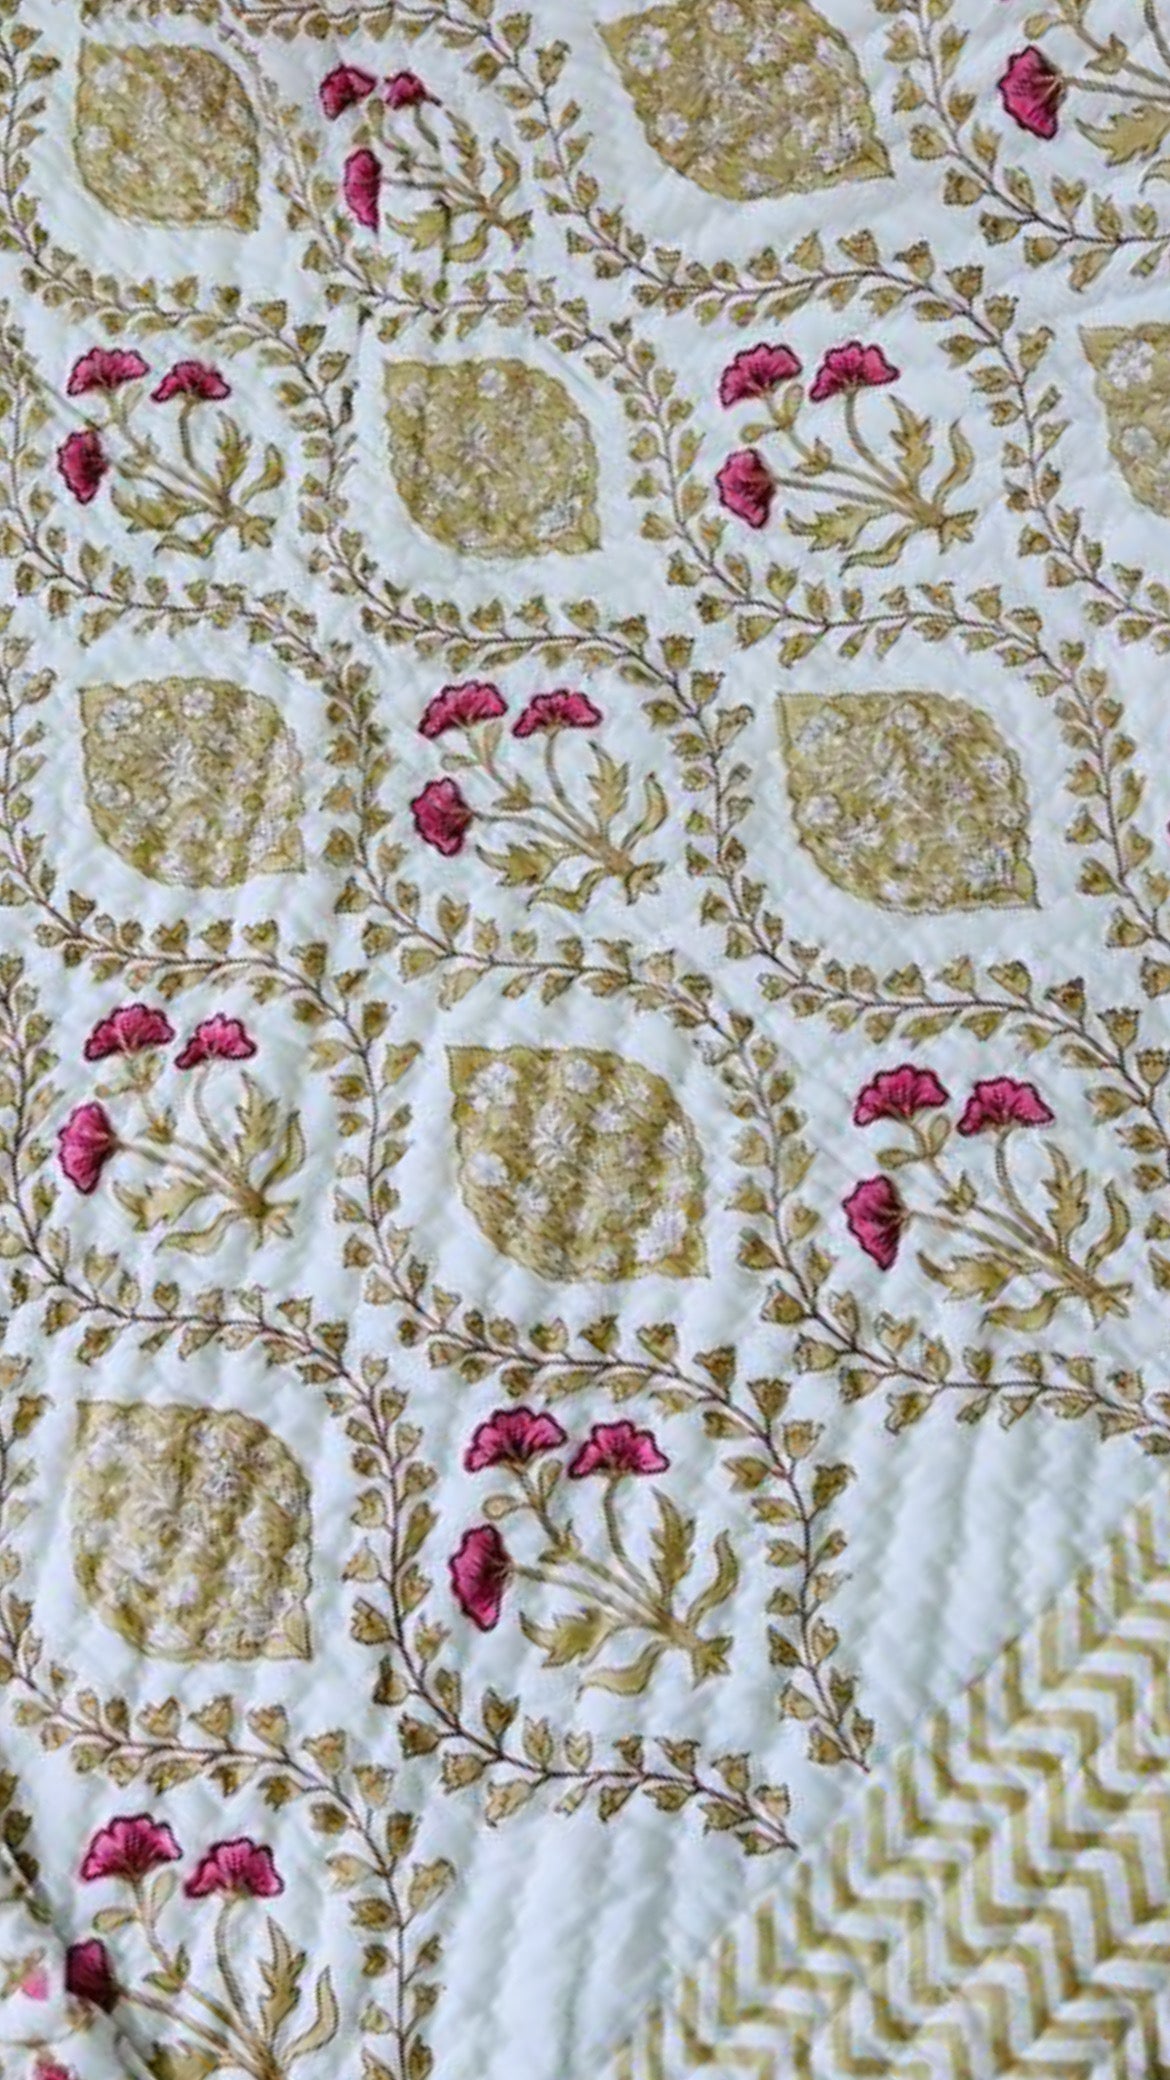 Beige Bliss Cotton Muslin Block Printed Quilt - Double Size 90x108 inches